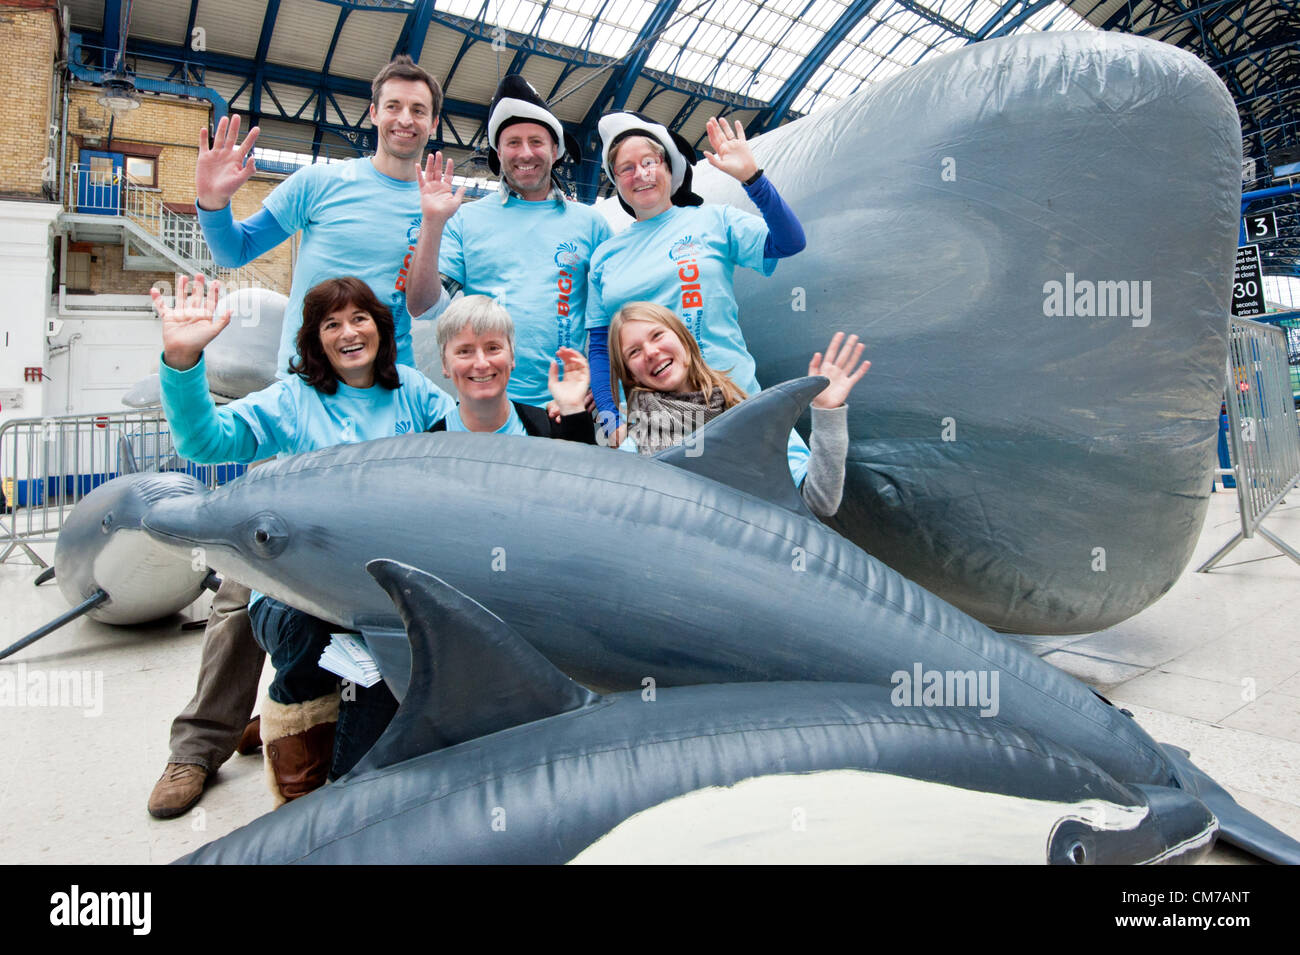 Brighton, UK. 21st October, 2012. Top - Common Dolphin held by L-R co-founders of Whalefest Dylan Walker, Ian Rowlands, with volunteers Linda Wessel and L-R front Daphne Rowlands Bec Hanley, Fiona Somerville with a Bottlenose Dolphin and the whale now standing at platfroms 1,2,and 3 of Brighton Station is a 13 metre female Sperm Whale. She, her calf and friends will be arriving at Whalefest at Brighton Hilton Metropole on 27th and 28th October 2012. phot Credit: Julia Claxton/Alamy Live News Stock Photo